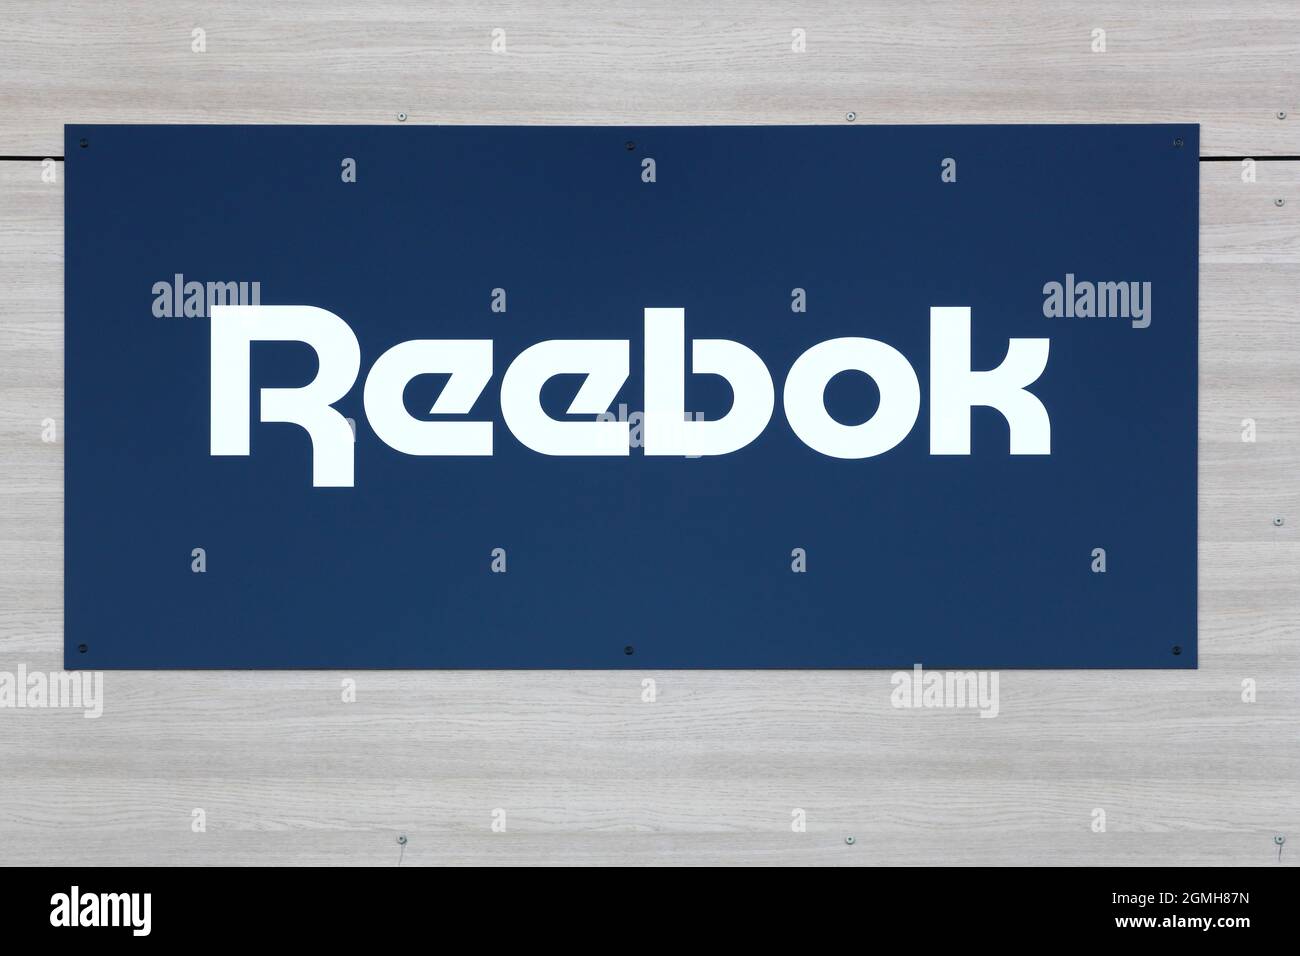 Villefranche, France - May 17, 2020: Reebok logo on a wall. Reebok is a global athletic footwear and apparel company Stock Photo